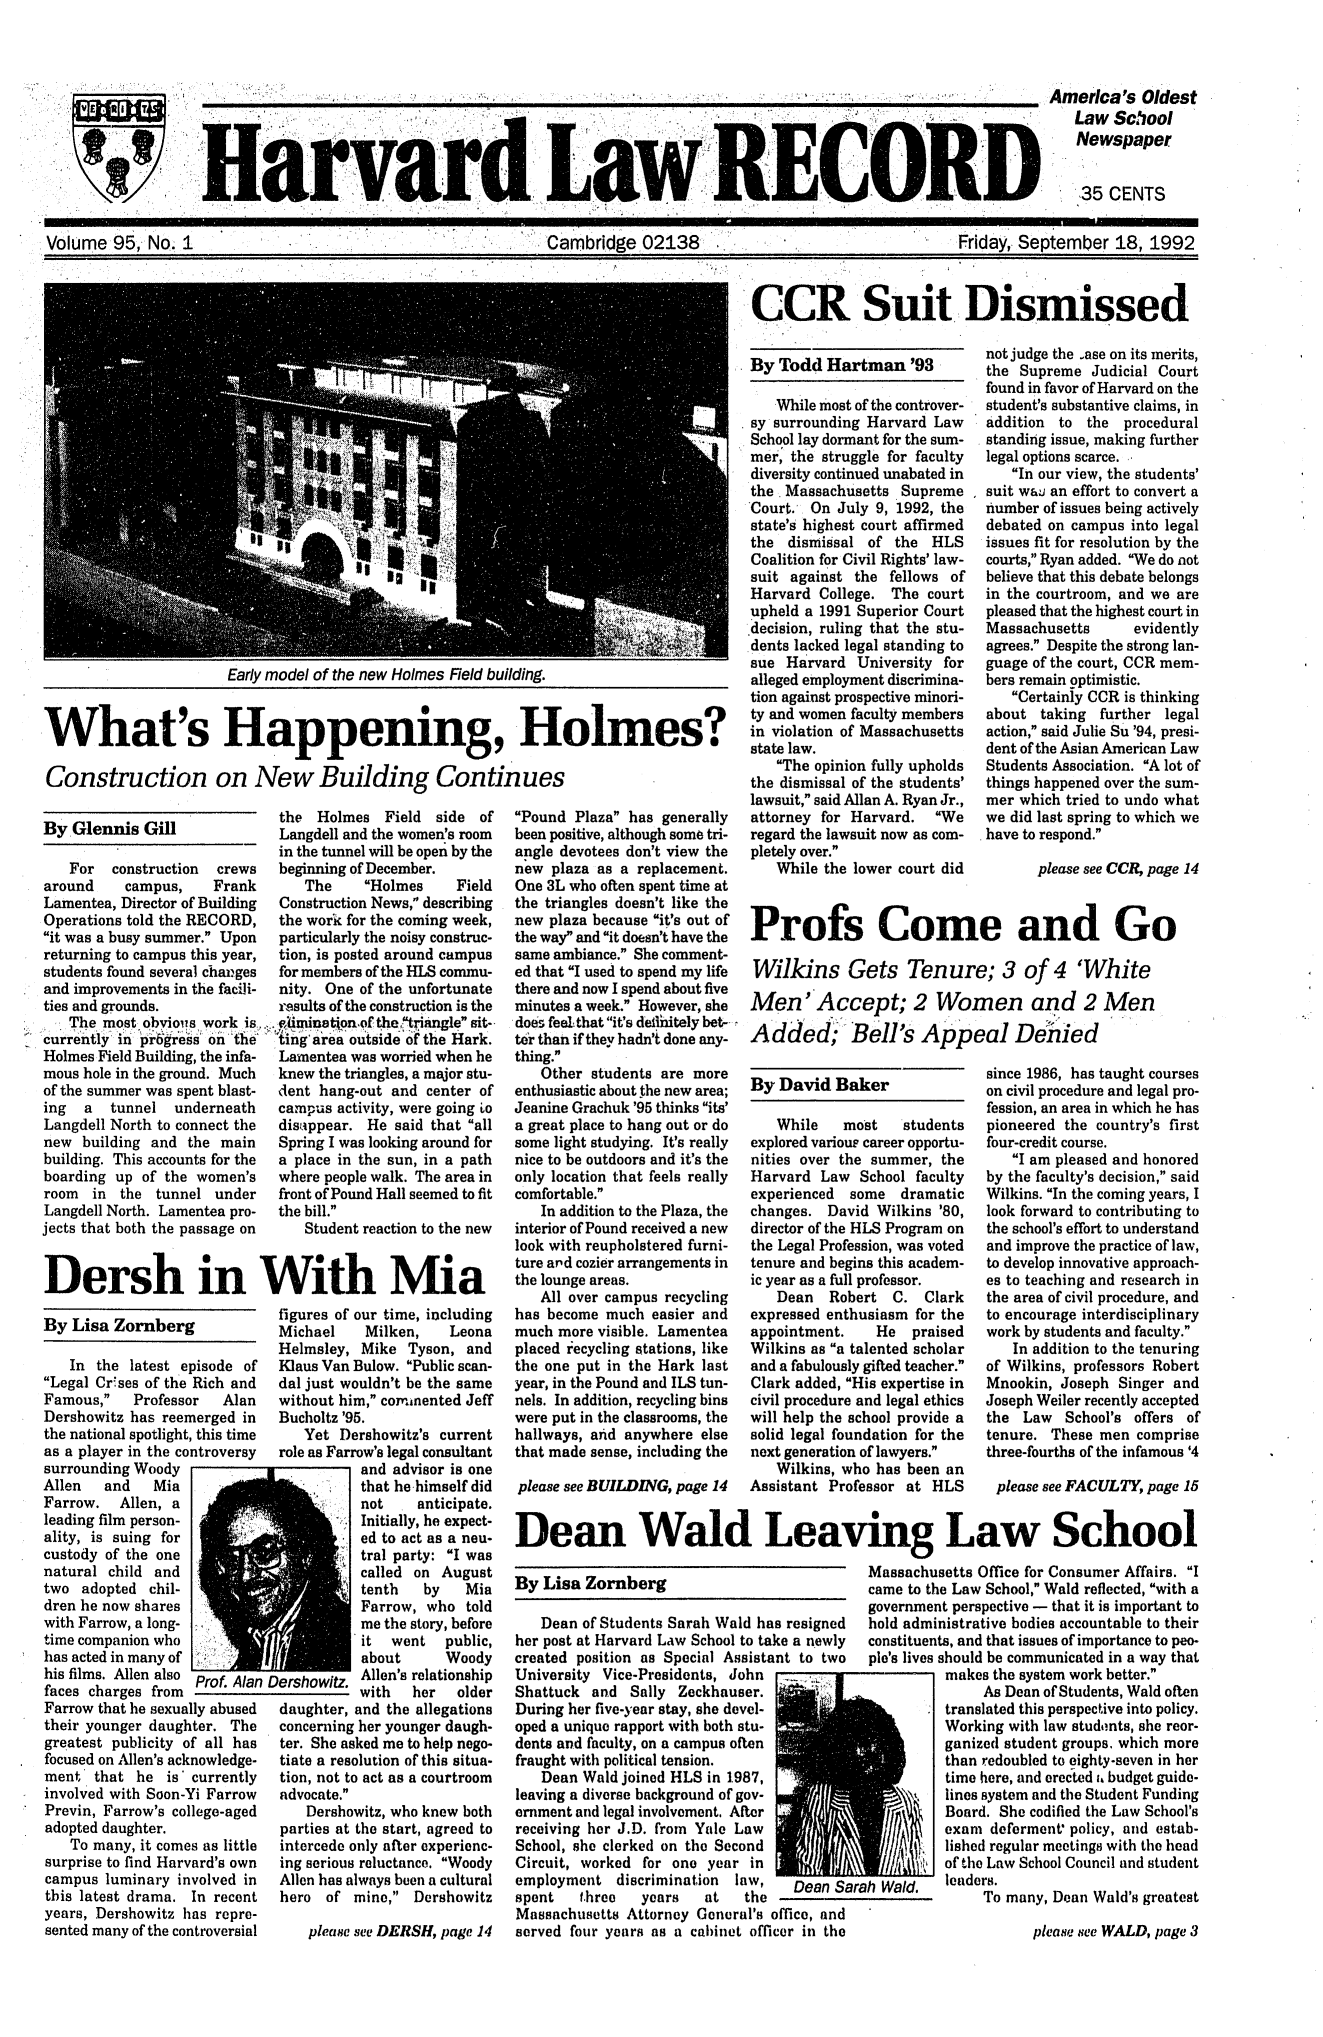 handle is hein.journals/hlrec95 and id is 1 raw text is: VERI         ORH .hYj' Law  CHIDAmerlia's OldestLaw SchoolNewspaper35 CENTSVolume 95, No. ICambridge 02138-Friday, September 18, 1992CCR Suit DismissedEarly model of the new Holmes Field building.What's Happening, Holmes?Construction on New Building ContinuesBy Glennis GillFor construction crewsaround    campus,    FrankLamentea, Director of BuildingOperations told the RECORD,it was a busy summer. Uponreturning to campus this year,students found several changesand improvements in the facili-ties and grounds.The most obvious work is,currenly* in pk~gre§s6 n**tn6Holmes Field Building, the infa-mous hole in the ground. Muchof the summer was spent blast-ing a tunnel underneathLangdell North to connect thenew building and the mainbuilding. This accounts for theboarding up of the women'sroom in the tunnel underLangdell North. Lamentea pro-jects that both the passage onthe Holmes Field side ofLangdell and the women's roomin the tunnel will be open by thebeginning of December.The    Holmes     FieldConstruction News, describingthe work for the coming week,particularly the noisy construc-tion, is posted around campusfor members of the HLS commu-nity. One of the unfortunateresults of the construction is the'imination'of the pangle sit-ing'area outside of the Hark.Lamentea was worried when heknew the triangles, a major stu-dent hang-out and center ofcampus activity, were going todisappear. He said that allSpring I was looking around fora place in the sun, in a pathwhere people walk. The area infront of Pound Hall seemed to fitthe bill.Student reaction to the newDersh in With MiaBy Lisa ZornbergIn the latest episode ofLegal Cr'ses of the Rich andFamous,   Professor   AlanDershowitz has reemerged inthe national spotlight, this timeas a player in the controversysurrounding WoodyAllen and MiaFarrow. Allen, aleading film person-ality, is suing forcustody of the onenatural child andtwo adopted chil-dren he now shareswith Farrow, a long-time companion whohas acted in many ofhis films. Allen also Prof. Alanfaces charges fromFarrow that he sexually abusedtheir younger daughter. Thegreatest publicity of all hasfocused on Allen's acknowledge-ment that he is' currentlyinvolved with Soon-Yi FarrowPrevin, Farrow's college-agedadopted daughter.To many, it comes as littlesurprise to find Harvard's owncampus luminary involved inthis latest drama. In recentyears, Dershowitz has repre-sented many of the controversialfigures of our time, includingMichael    Milken,    LeonaHelmsley, Mike Tyson, andKlaus Van Bulow. Public scan-dal just wouldn't be the samewithout him, cornmmented JeffBucholtz '95.Yet Dershowitz's currentrole as Farrow's legal consultantand advisor is onethat he himself didnot    anticipate.Initially, he expect-ed to act as a neu-tral party: I wascalled on Augusttenth   by    MiaFarrow, who toldme the story, beforeit went public,about      Woody)ershowitz. Allen's relationshipwith   her   olderdaughter, and the allegationsconcerning her younger daugh-ter. She asked me to help nego-tiate a resolution of this situa-tion, not to act as a courtroomadvocate.Dershowitz, who knew bothparties at the start, agreed tointercede only after experienc-ing serious reluctance. WoodyAllen has always been a culturalhero of mine, Dershowitzplease see DERSH, page 14Pound Plaza has generallybeen positive, although some tri-angle devotees don't view thenew plaza as a replacement.One 3L who often spent time atthe triangles doesn't like thenew plaza because it's out ofthe way and it doesn't have thesame ambiance. She comment-ed that I used to spend my lifethere and now I spend about fiveminutes a week. However, shedoes feel: that it's dedniaitely bet-ter than if they hadn't done any-thing.Other students are moreenthusiastic about the new area;Jeanine Grachuk '95 thinks its'a great place to hang out or dosome light studying. It's reallynice to be outdoors and it's theonly location that feels reallycomfortable.In addition to the Plaza, theinterior of Pound received a newlook with reupholstered furni-ture and cozier arrangements inthe lounge areas.All over campus recyclinghas become much easier andmuch more visible. Lamenteaplaced recycling stations, likethe one put in the Hark lastyear, in the Pound and ILS tun-nels. In addition, recycling binswere put in the classrooms, thehallways, and anywhere elsethat made sense, including theplease see BUILDING, page 14By Todd Hartman '93While most of the controver-sy surrounding Harvard LawSchool lay dormant for the sum-mer, the struggle for facultydiversity continued unabated inthe Massachusetts SupremeCourt., On July 9, 1992, thestate's highest court affirmedthe dismissal of the HLSCoalition for Civil Rights' law-suit against the fellows ofHarvard College. The courtupheld a 1991 Superior Court.decision, ruling that the stu-dents lacked legal standing tosue Harvard University foralleged employment discrimina-tion against prospective minori-ty and women faculty membersin violation of Massachusettsstate law.The opinion fully upholdsthe dismissal of the students'lawsuit, said Allan A. Ryan Jr.,attorney for Harvard. Weregard the lawsuit now as com-pletely over.While the lower court didBy David BakerWhile   most    studentsexplored various career opportu-nities over the summer, theHarvard Law School facultyexperienced some dramaticchanges. David Wilkins '80,director of the HLS Program onthe Legal Profession, was votedtenure and begins this academ-ic year as a full professor.Dean Robert C. Clarkexpressed enthusiasm for theappointment.    He  praisedWilkins as a talented scholarand a fabulously gifted teacher.Clark added, His expertise incivil procedure and legal ethicswill help the school provide asolid legal foundation for thenext generation of lawyers.Wilkins, who has been anAssistant Professor at HLSnot judge the ase on its merits,the Supreme Judicial Courtfound in favor of Harvard on thestudent's substantive claims, inaddition to the proceduralstanding issue, making furtherlegal options scarce.In our view, the students'suit wai an effort to convert anumber of issues being activelydebated on campus into legalissues fit for resolution by thecourts, Ryan added. We do notbelieve that this debate belongsin the courtroom, and we arepleased that the highest court inMassachusetts      evidentlyagrees. Despite the strong lan-guage of the court, CCR mem-bers remain optimistic.Certainly CCR is thinkingabout taking further legalaction, said Julie Su '94, presi-dent of the Asian American LawStudents Association. A lot ofthings happened over the sum-mer which tried to undo whatwe did last spring to which wehave to respond.please see CCR, page 14since 1986, has taught courseson civil procedure and legal pro-fession, an area in which he haspioneered the country's firstfour-credit course.I am pleased and honoredby the faculty's decision, saidWilkins. In the coming years, Ilook forward to contributing tothe school's effort to understandand improve the practice of law,to develop innovative approach-es to teaching and research inthe area of civil procedure, andto encourage interdisciplinarywork by students and faculty.In addition to the tenuringof Wilkins, professors RobertMnookin, Joseph Singer andJoseph Weiler recently acceptedthe Law School's offers oftenure. These men comprisethree-fourths of the infamous '4please see FACULTY, page 15Dean Wald Leaving Law SchoolBy Lisa ZornbergMassachucame to thgovernmenDean of Students Sarah Wald has resigned  hold admiher post at Harvard Law School to take a newly  constituencreated position as Special Assistant to two  pie's livesUniversity Vice-Presidents, JohnShattuck and Sally Zeckhauser.During her five-year stay, she devel-oped a unique rapport with both stu-dents and faculty, on a campus oftenfraught with political tension.Dean Wald joined HLS in 1987,leaving a diverse background of gov-ernment and legal involvement. Afterreceiving her J.D. from Yale LawSchool, she clerked on the SecondCircuit, worked for one year inemployment discrimination   law,   Dean Sarah Wald.spent   three   years   at   theMassachusetts Attorney General's office, andserved four years as a cabinet officer in theusetts Office for Consumer Affairs. Ihe Law School, Wald reflected, with ant perspective - that it is important toinistrative bodies accountable to their.ts, and that issues of importance to peo-should be communicated in a way thatmakes the system work better.As Dean of Students, Wald oftentranslated this perspective into policy.Working with law students, she reor-ganized student groups, which morethan redoubled to eighty-seven in hertime here, and erected i, budget guide-lines system and the Student FundingBoard. She codified the Law School'sexam deferment policy, and estab-lished regular meetings with the headof the Law School Council and studentleaders.To many, Dean Wald's greatestplease see WALD, page 3Profs Come and GoWilkins Gets Tenure; 3 of 4 'WhiteMen' Accept; 2 Women and 2 MenAdded; Bell's Appeal DehtiedD7L